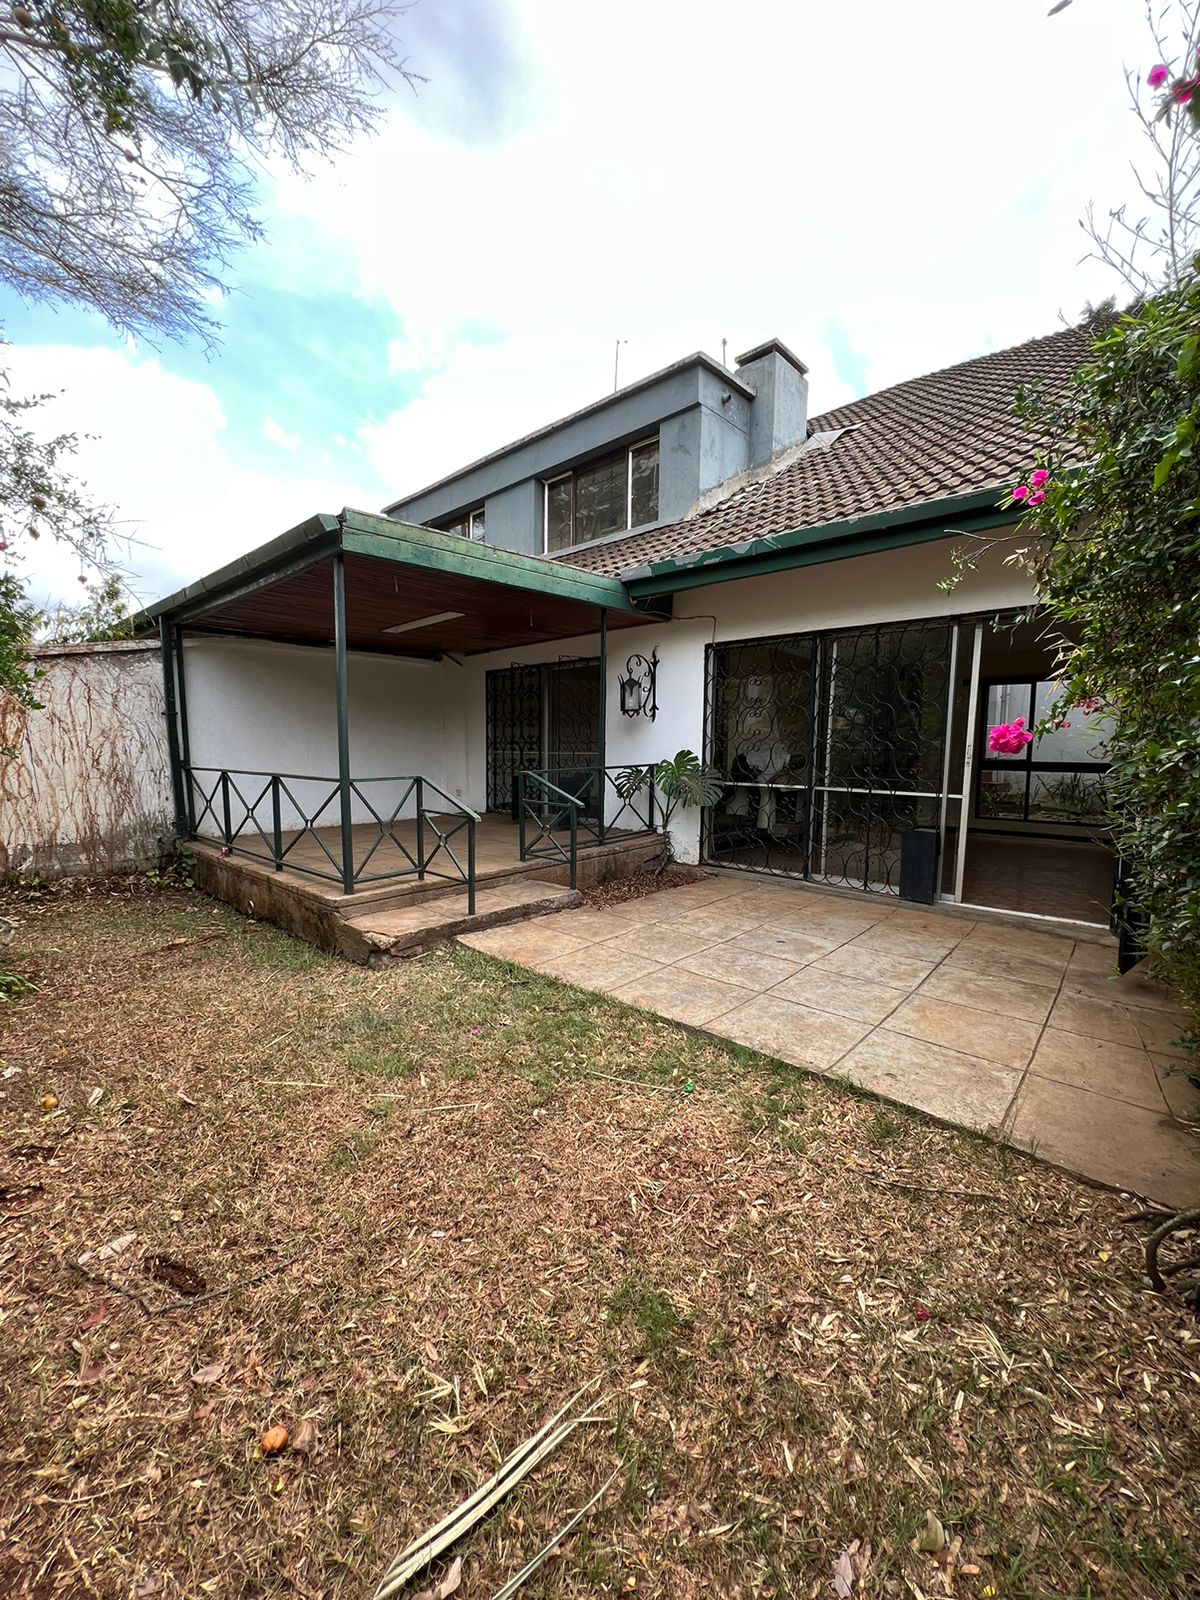 4 bedroom villa to let located in the heart of kileleshwa area. Musilli Homes